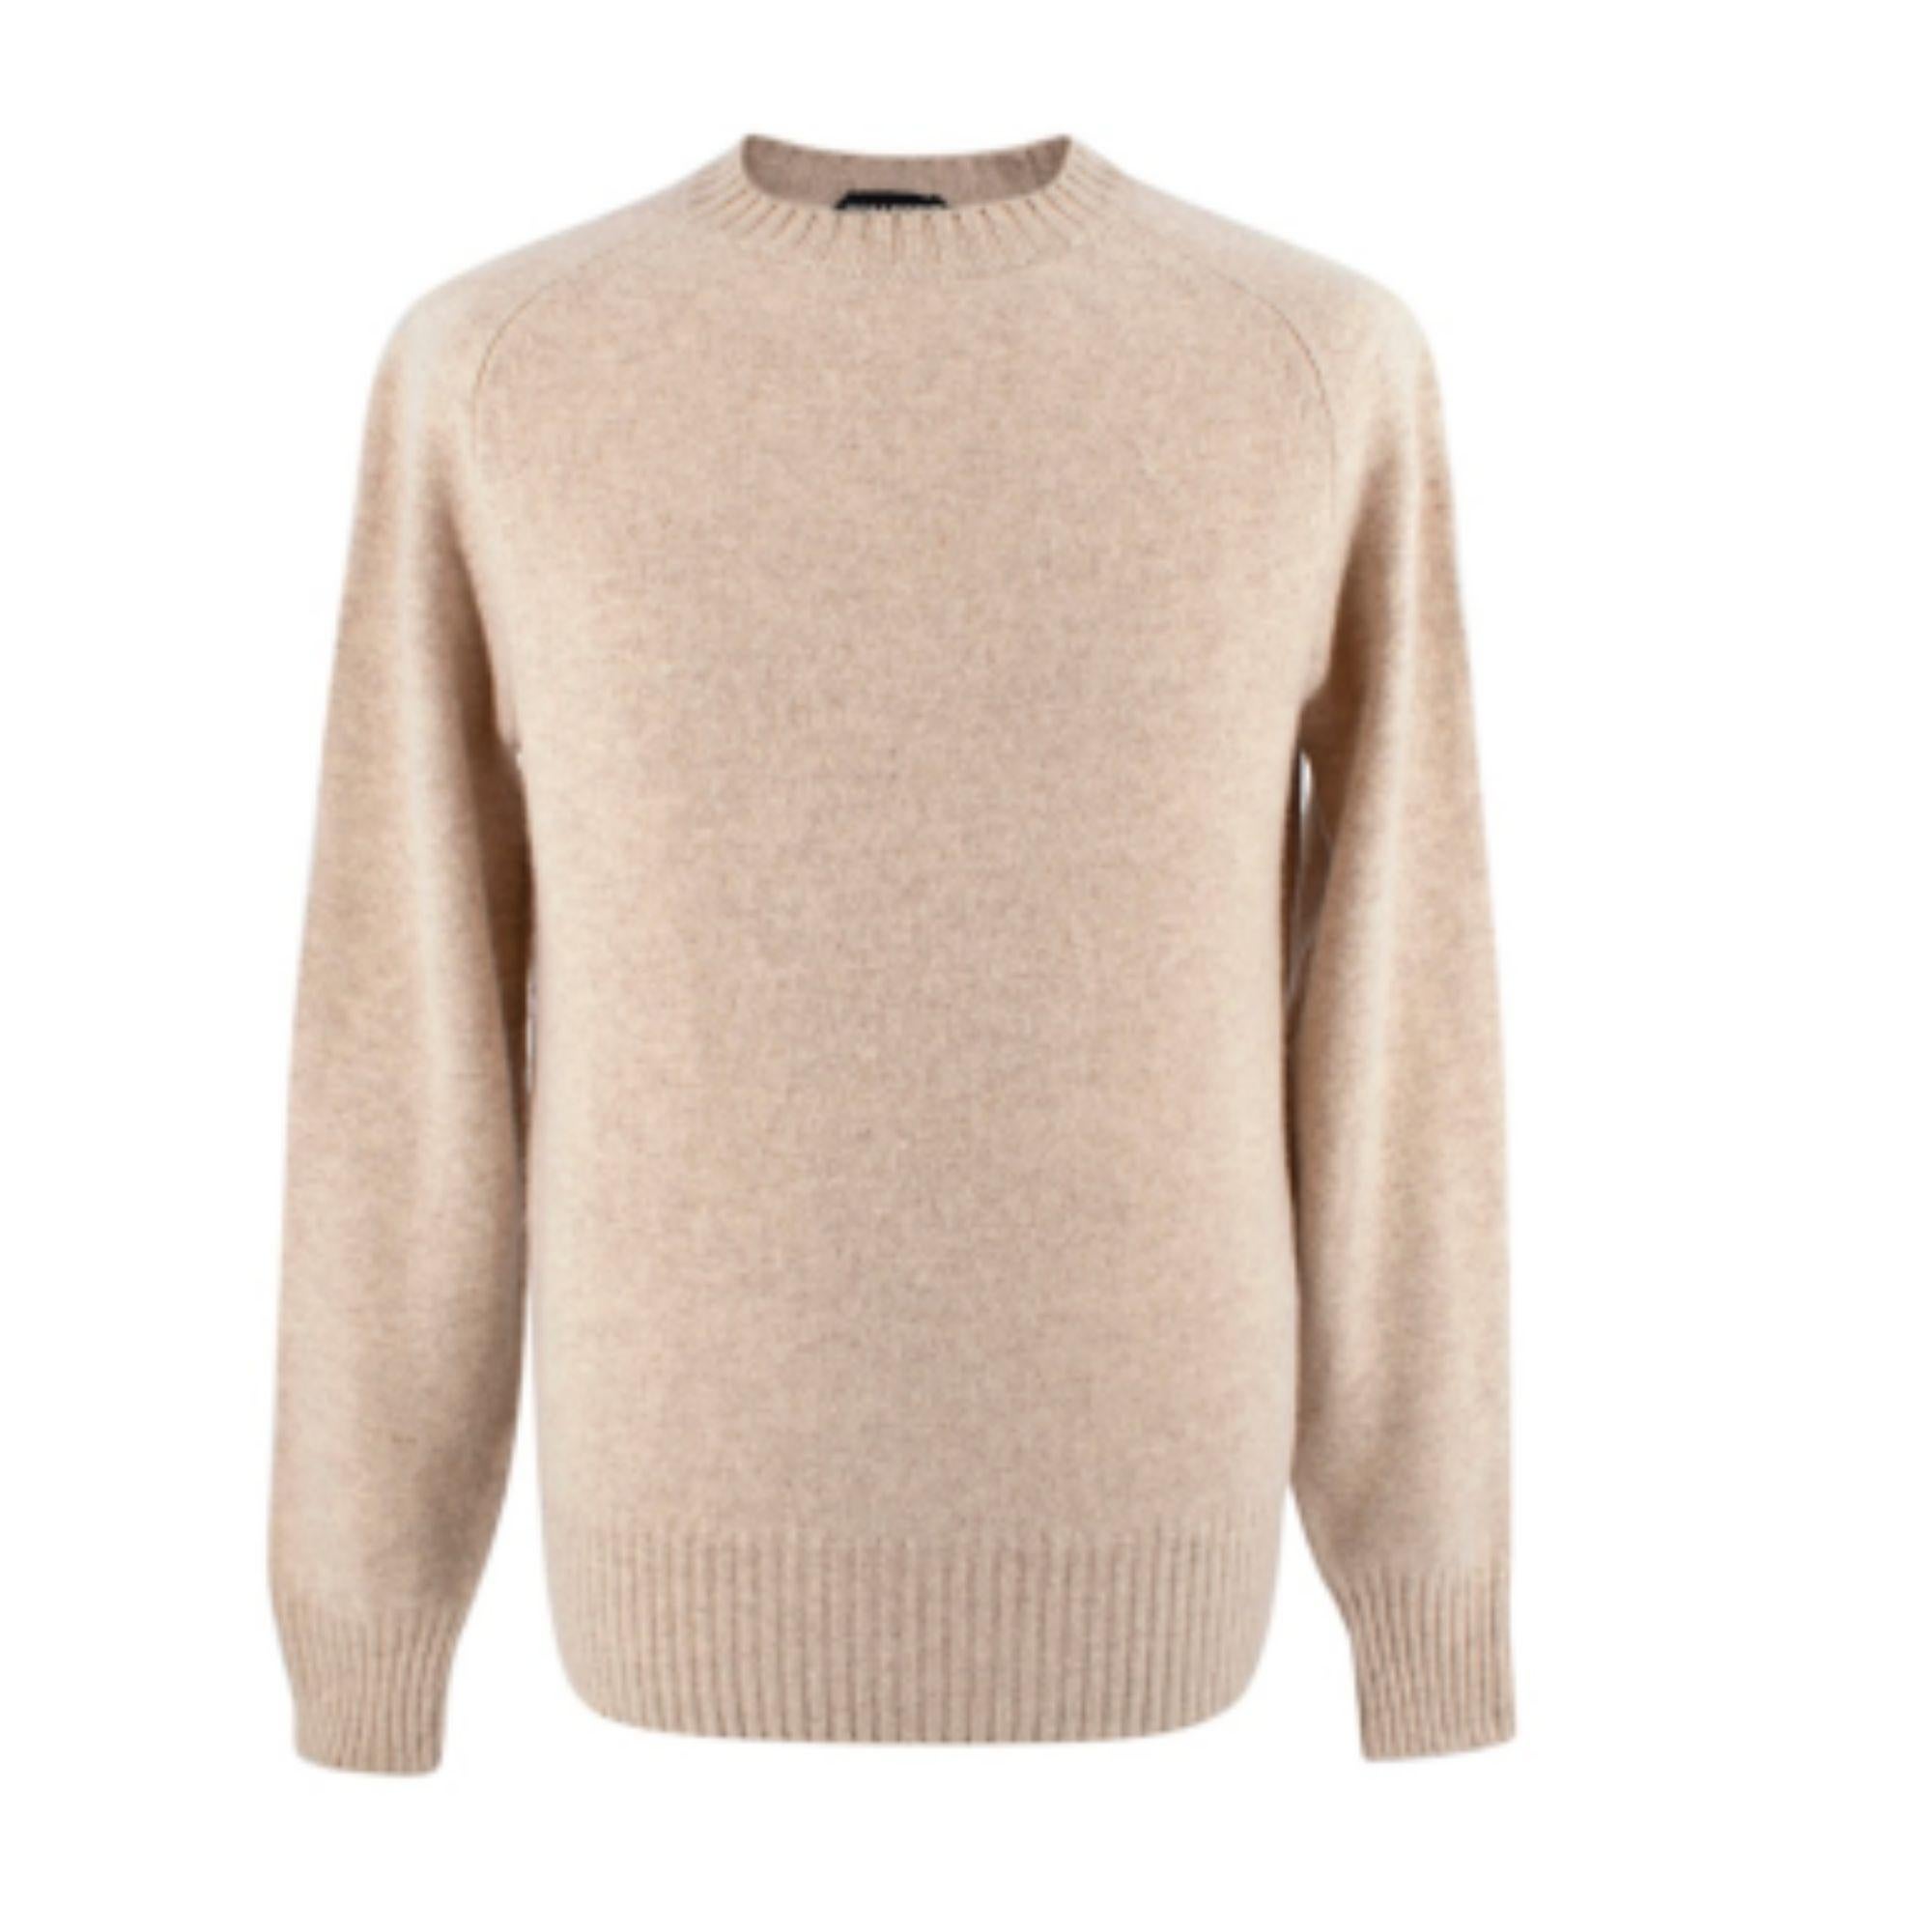 Tom Ford Beige Wool Crew Neck Sweater

- Beige, soft wool Tom Ford crewneck sweater
- Ribbed trim on collar, cuffs and bottom hems

Materials:
100% Wool

Made in Italy 
Dry-clean only

PLEASE NOTE, THESE ITEMS ARE PRE-OWNED AND MAY SHOW SIGNS OF